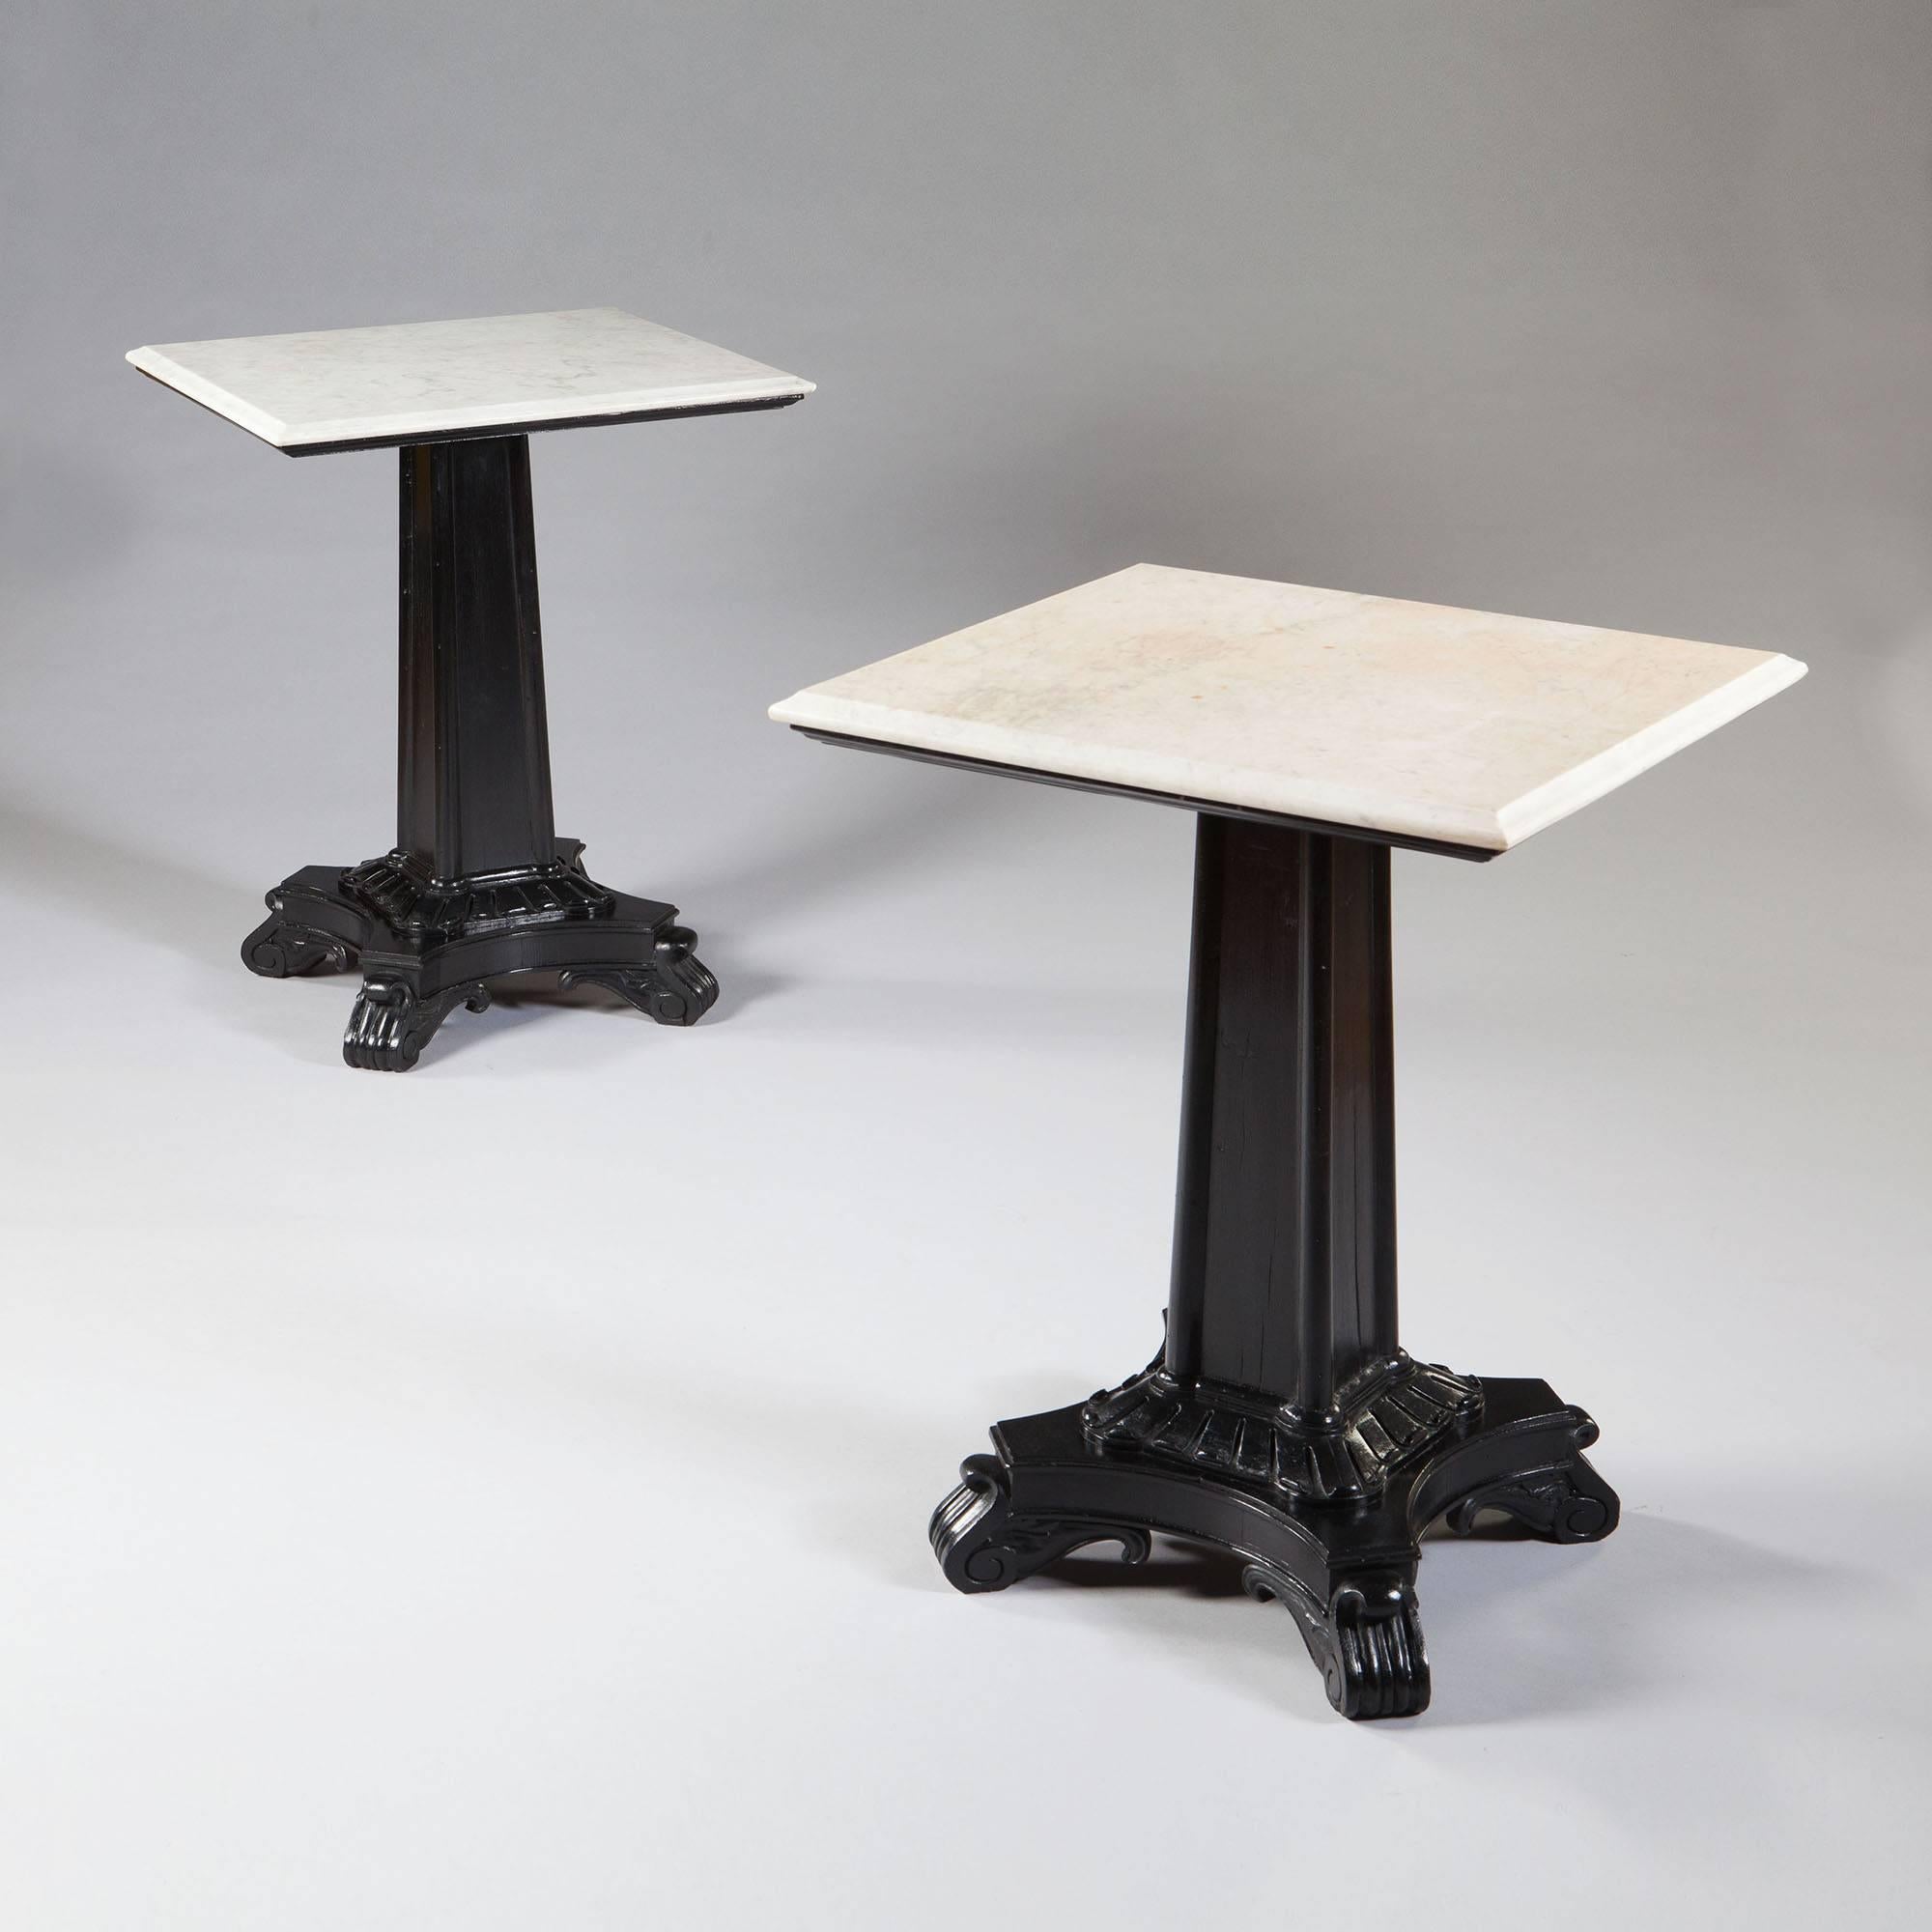 A pair of late 19th century ebonized end tables with nearly square marble tops. The bases are columns with stylized scrolls to the base and standing on concave sided plinths terminating in scroll feet,

India, circa 1880.
Measures:
Height 30 ins